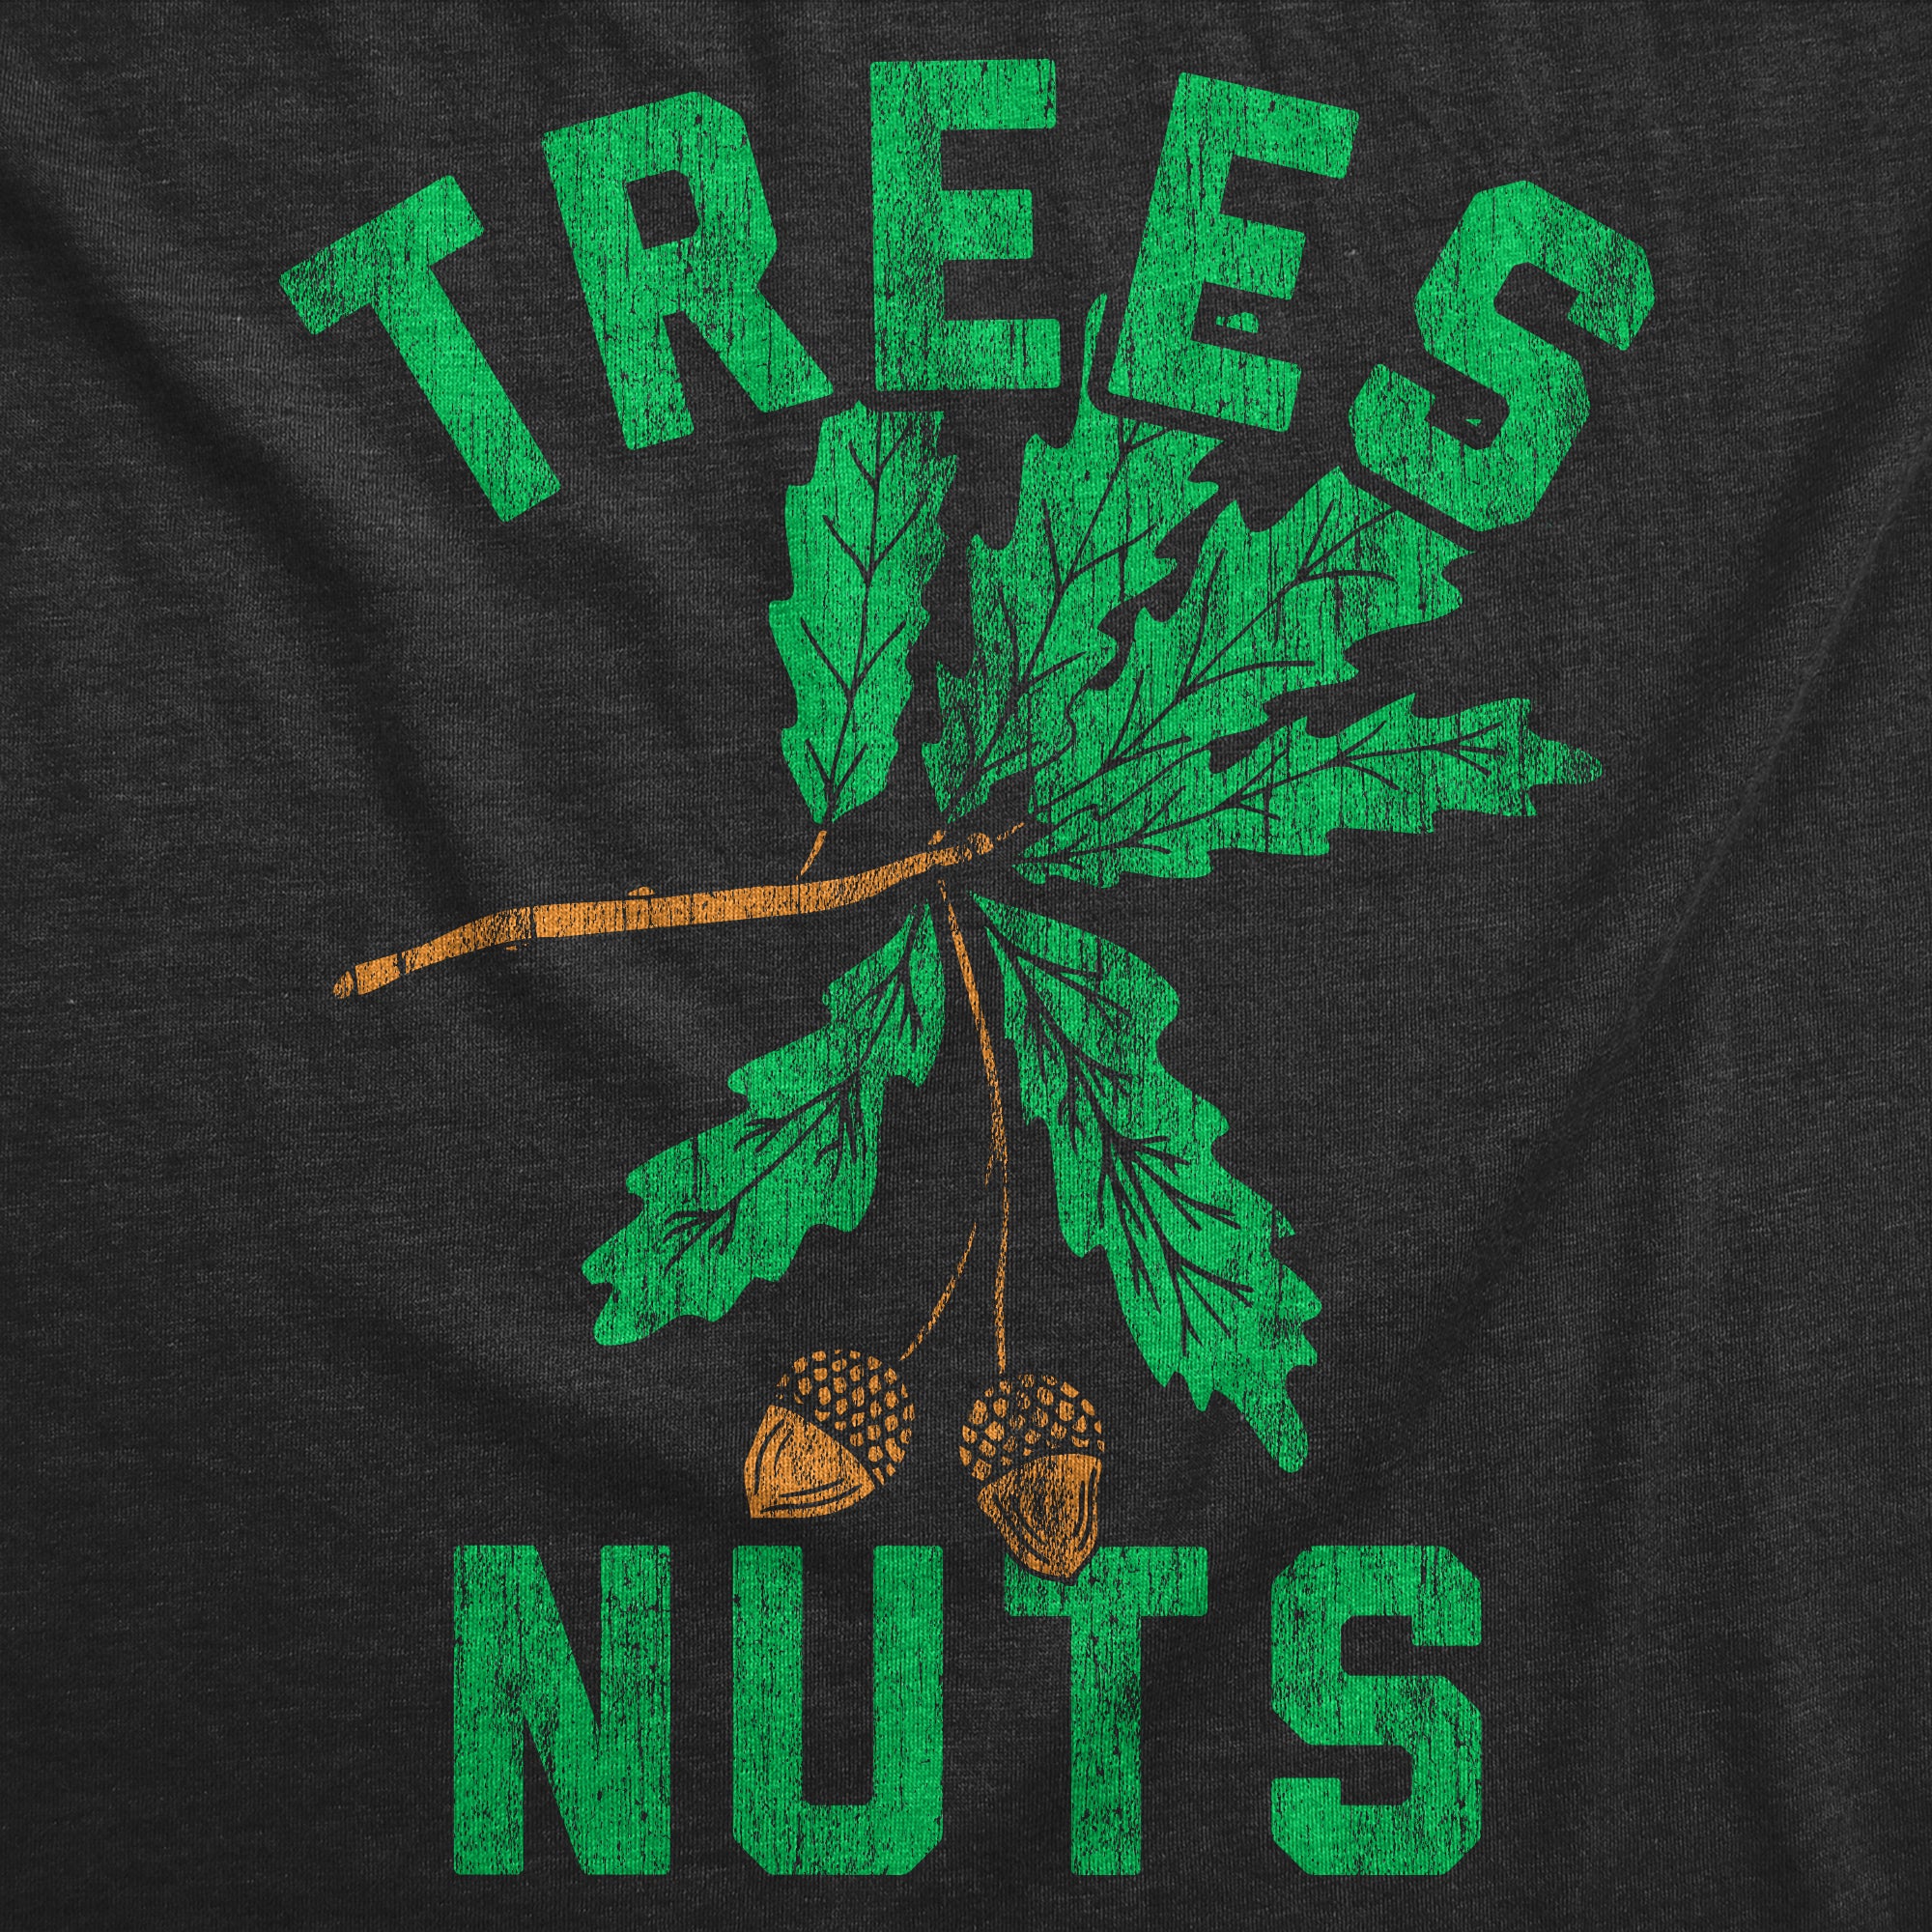 Funny Heather Black - Trees Nuts Trees Nuts Womens T Shirt Nerdy sarcastic Tee